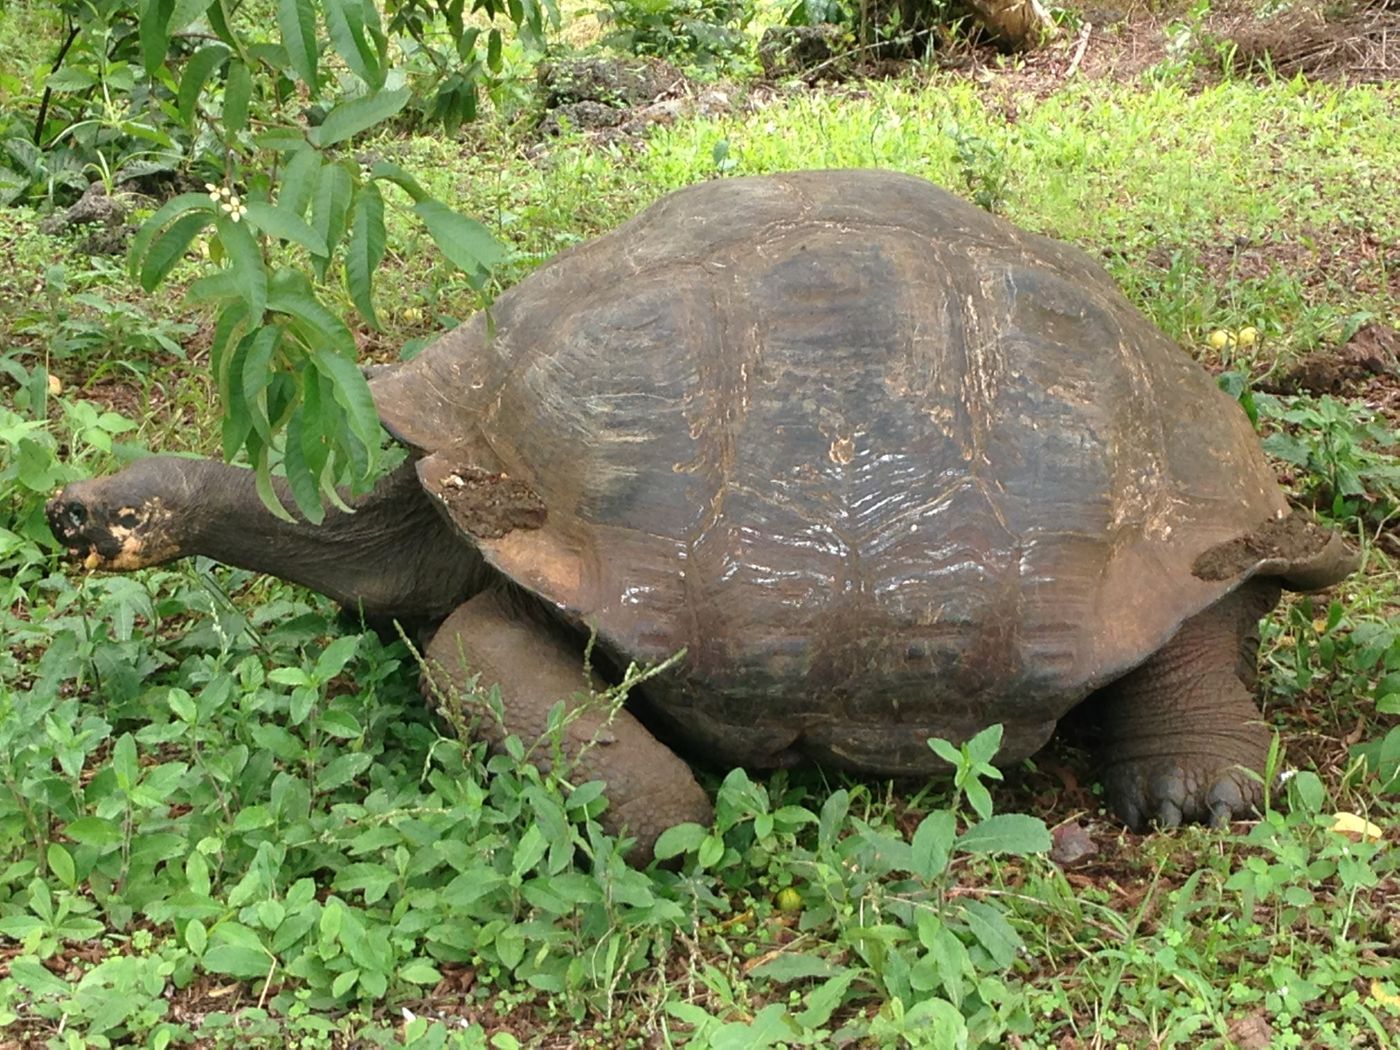 Giant tortoises like this one are breed in hatcheries on several of the islands in order to boost populations. Photo: Author